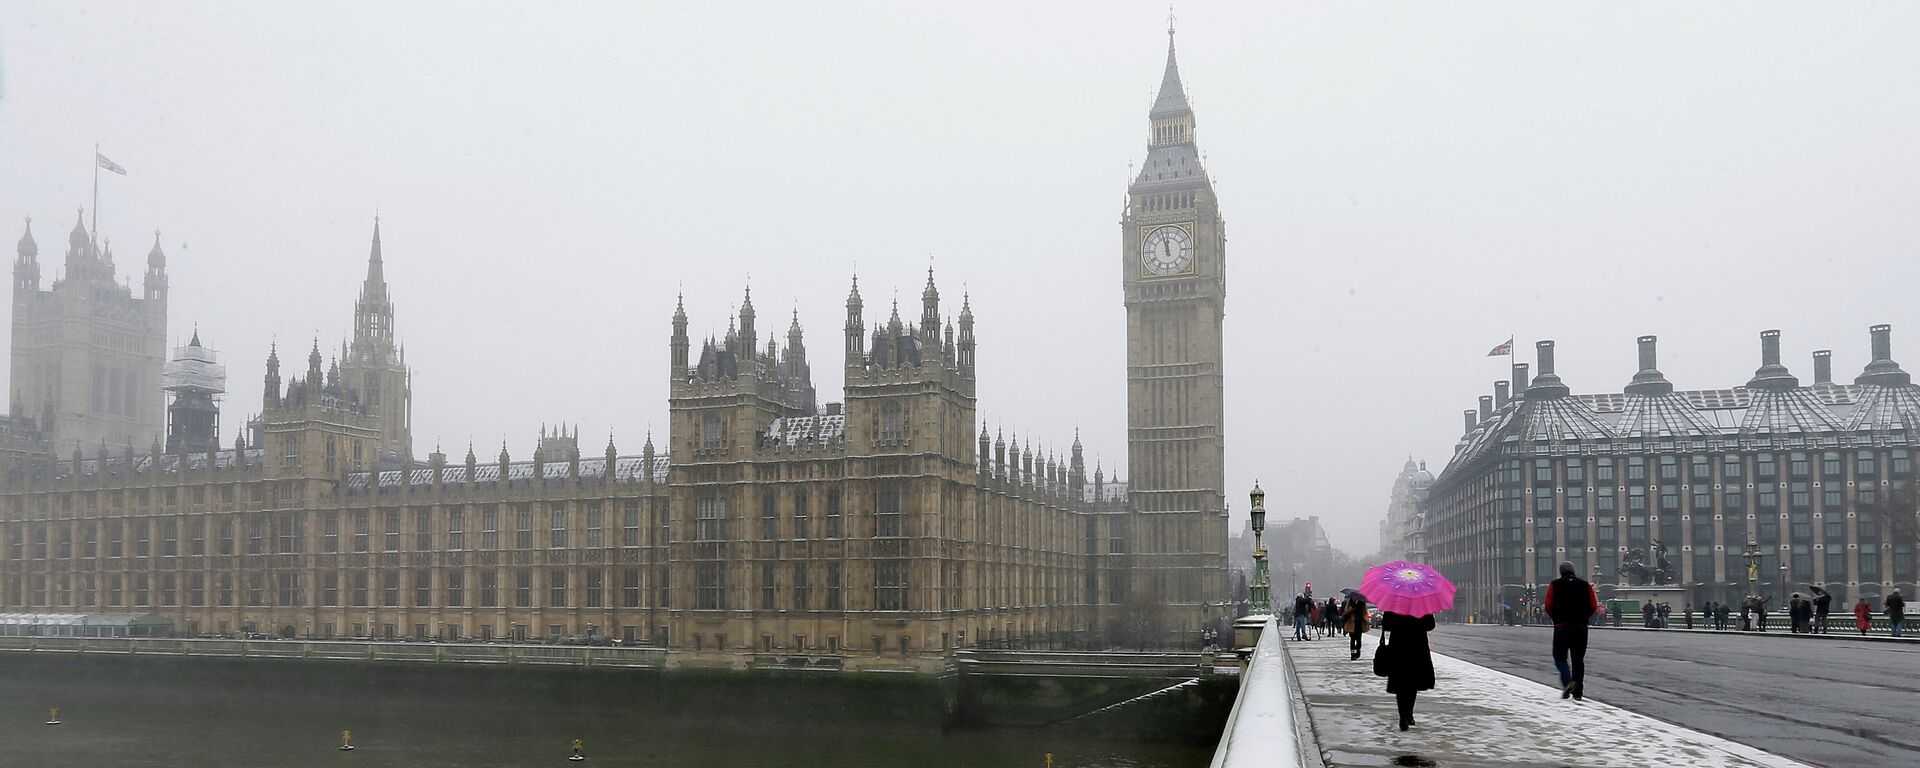 A woman carrying a pink umbrella walks across Westminster Bridge, with the Palace of Westminster in the background as it begins to snow in London, Friday, Jan. 18, 2013 - اسپوتنیک افغانستان  , 1920, 28.01.2022